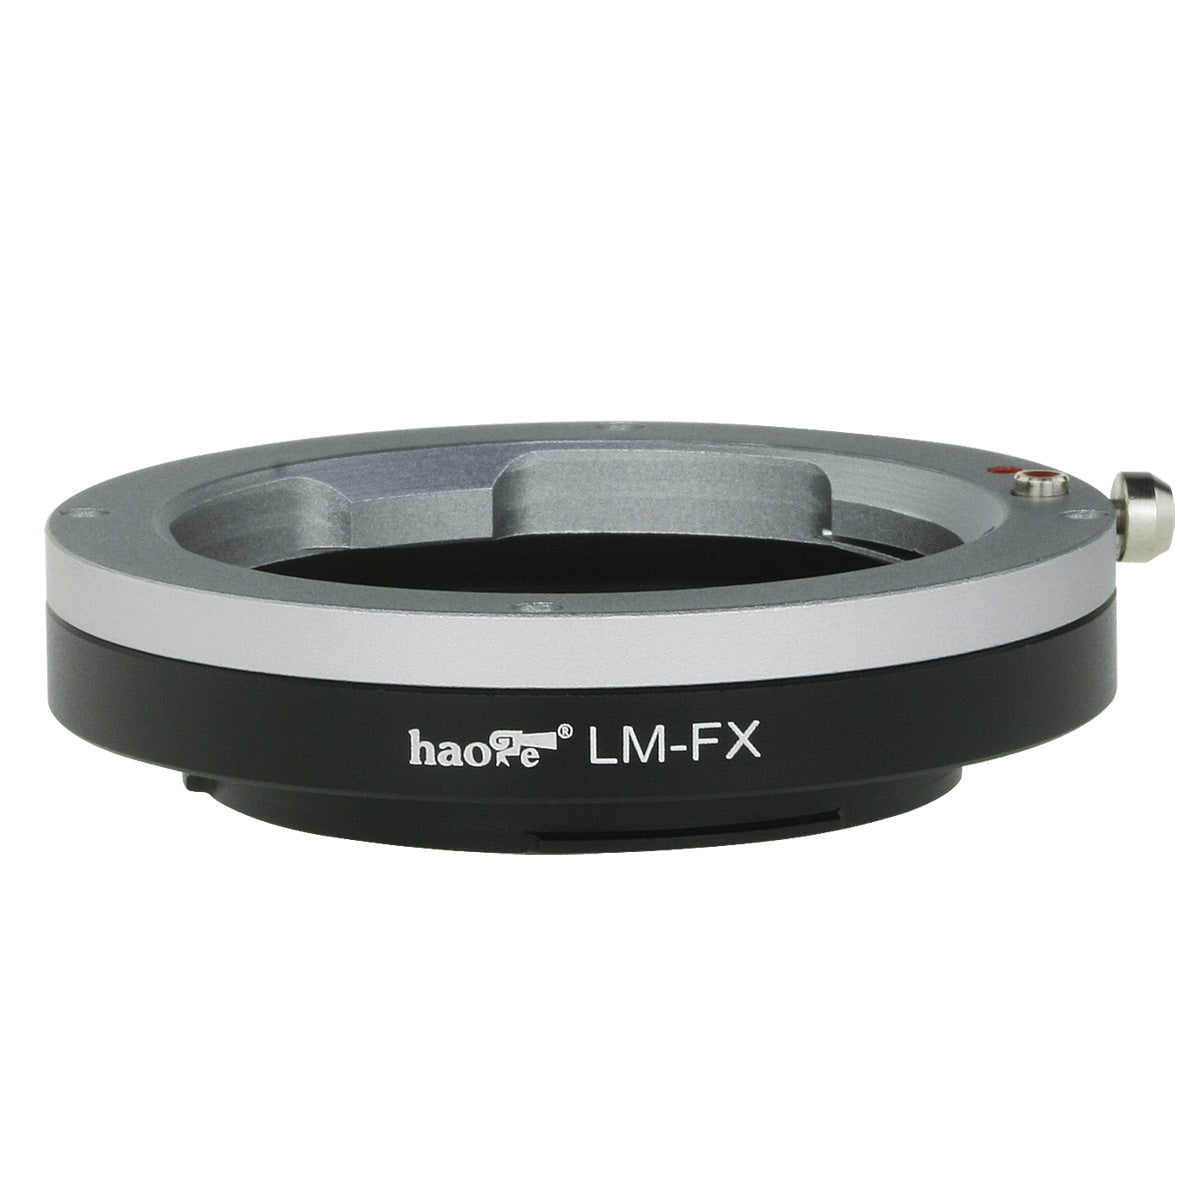 Haoge Lens Mount Adapter for Leica M mount Lens to Fujifilm X-mount Camera such as X-A1, X-A2, X-A3, X-A10, X-E1, X-E2, X-E2s, X-M1, X-Pro1, X-Pro2, X-T1, X-T2, X-T10, X-T20